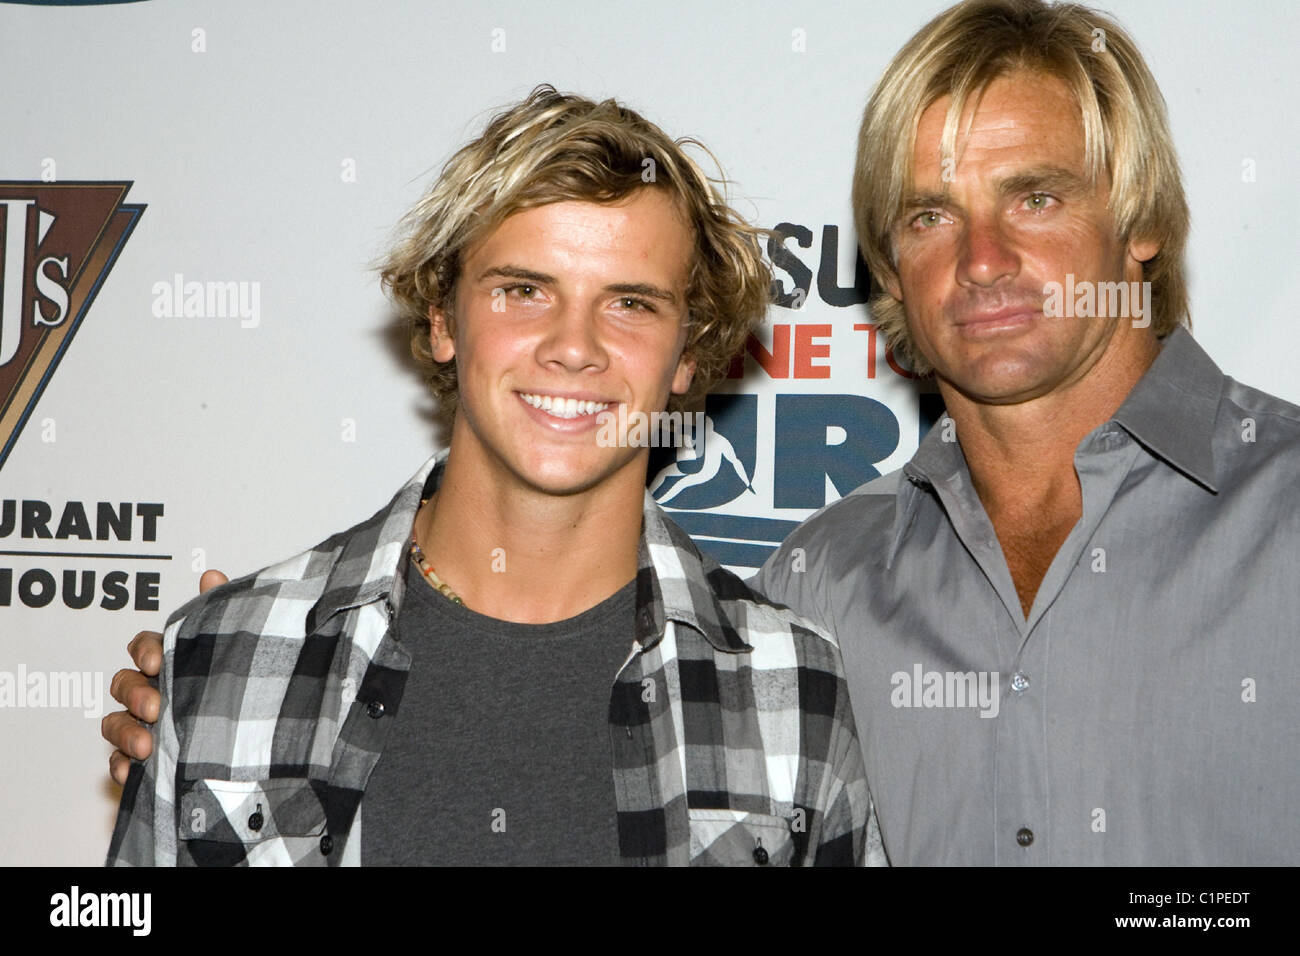 Laird Hamilton and Julian Wilson The Pacsun Pipeline Campaign Fundraiser for Cystic Fibrosis held in the Hyatt Regency Resort Stock Photo